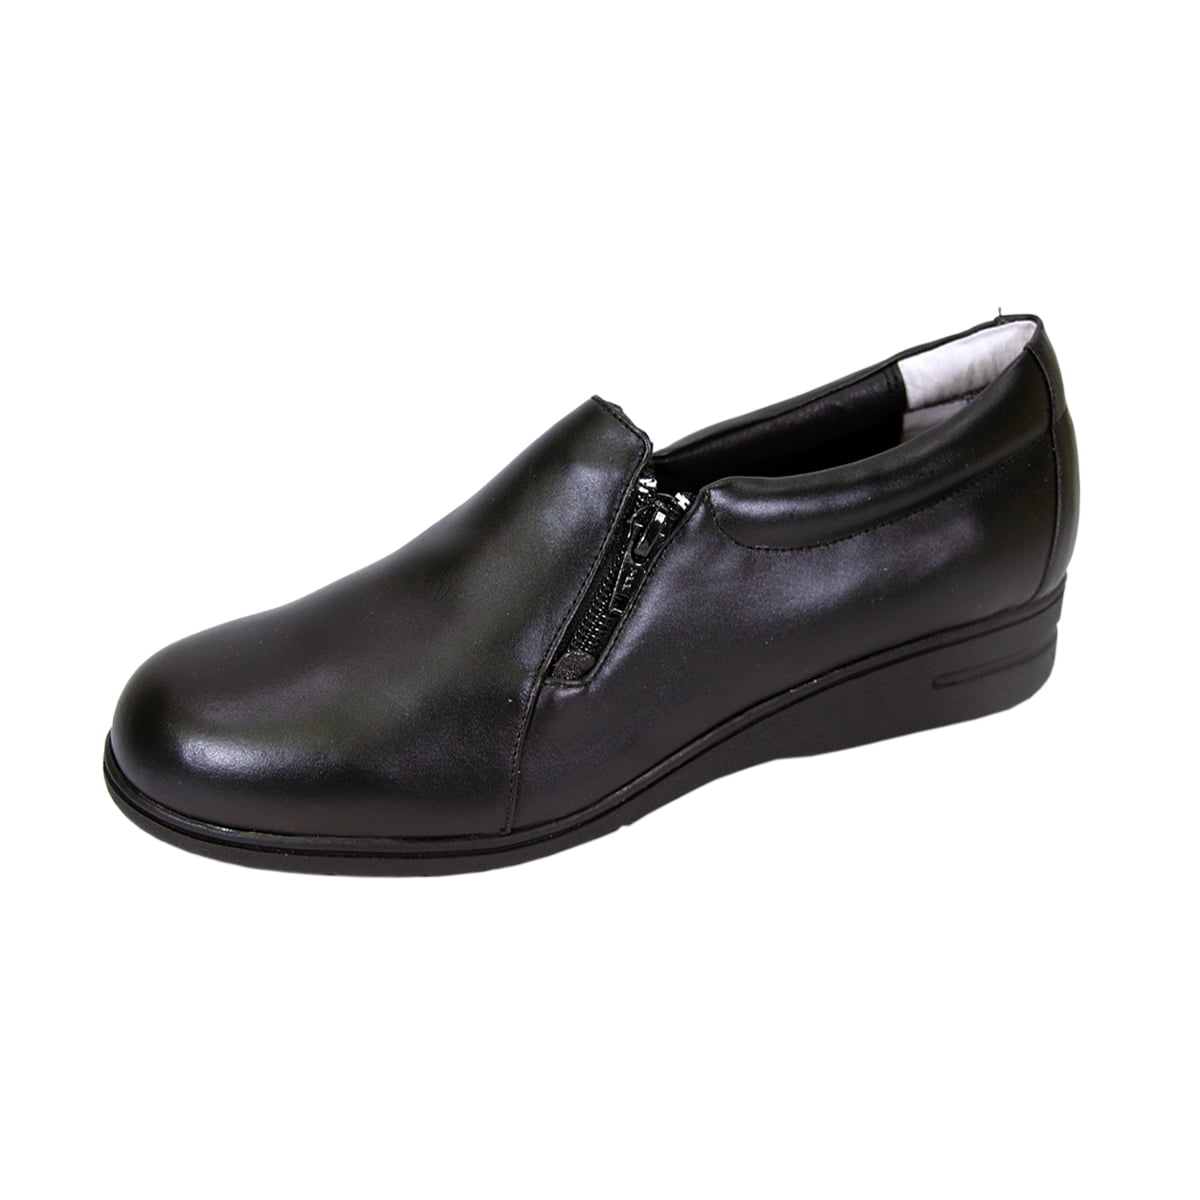 comfortable wide shoes for work